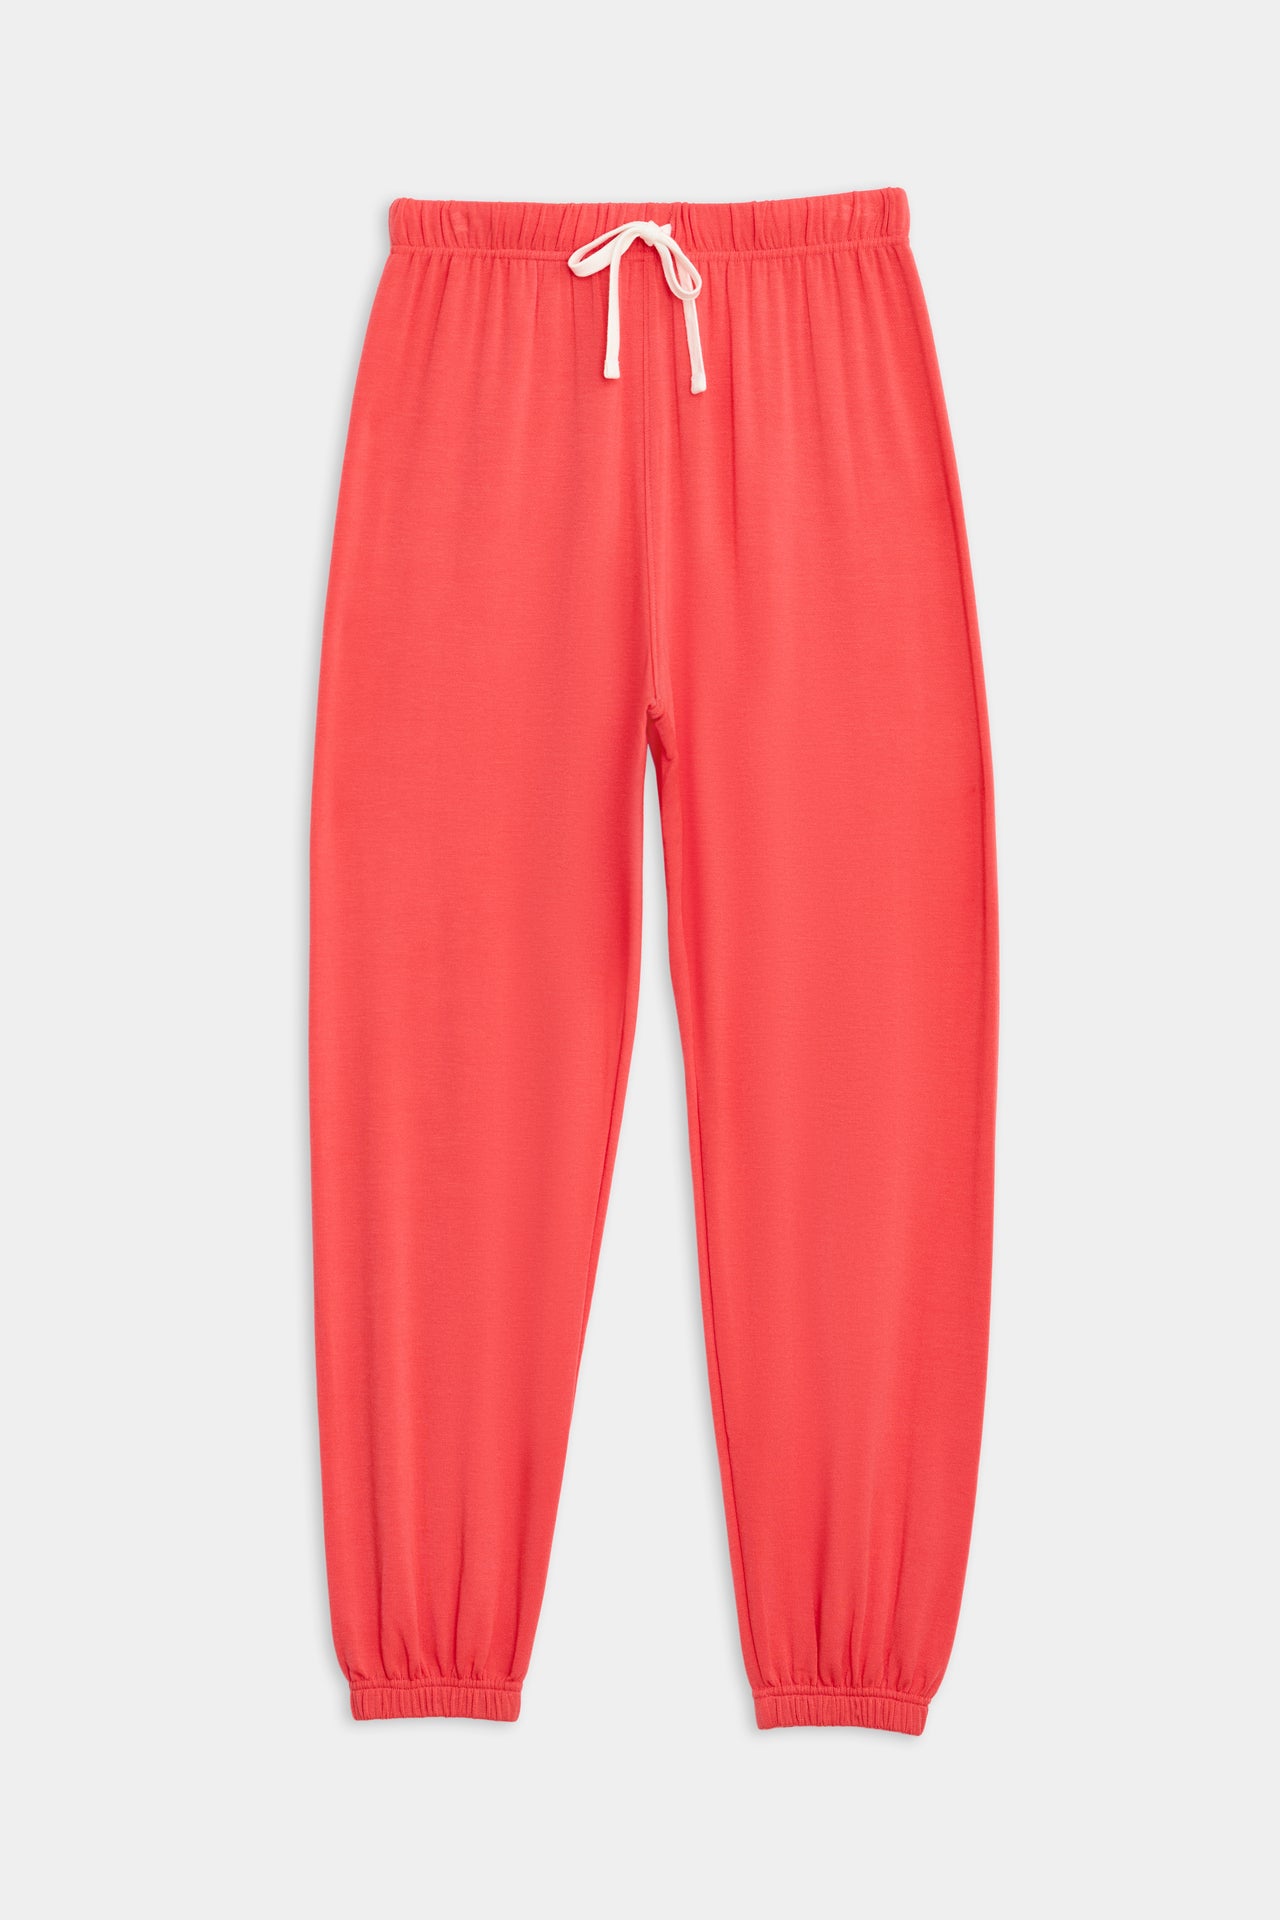 Bright red Andie Oversized Fleece Sweatpants with a drawstring waist and elastic cuffs, made from a comfortable fit modal spandex fabric blend by SPLITS59.